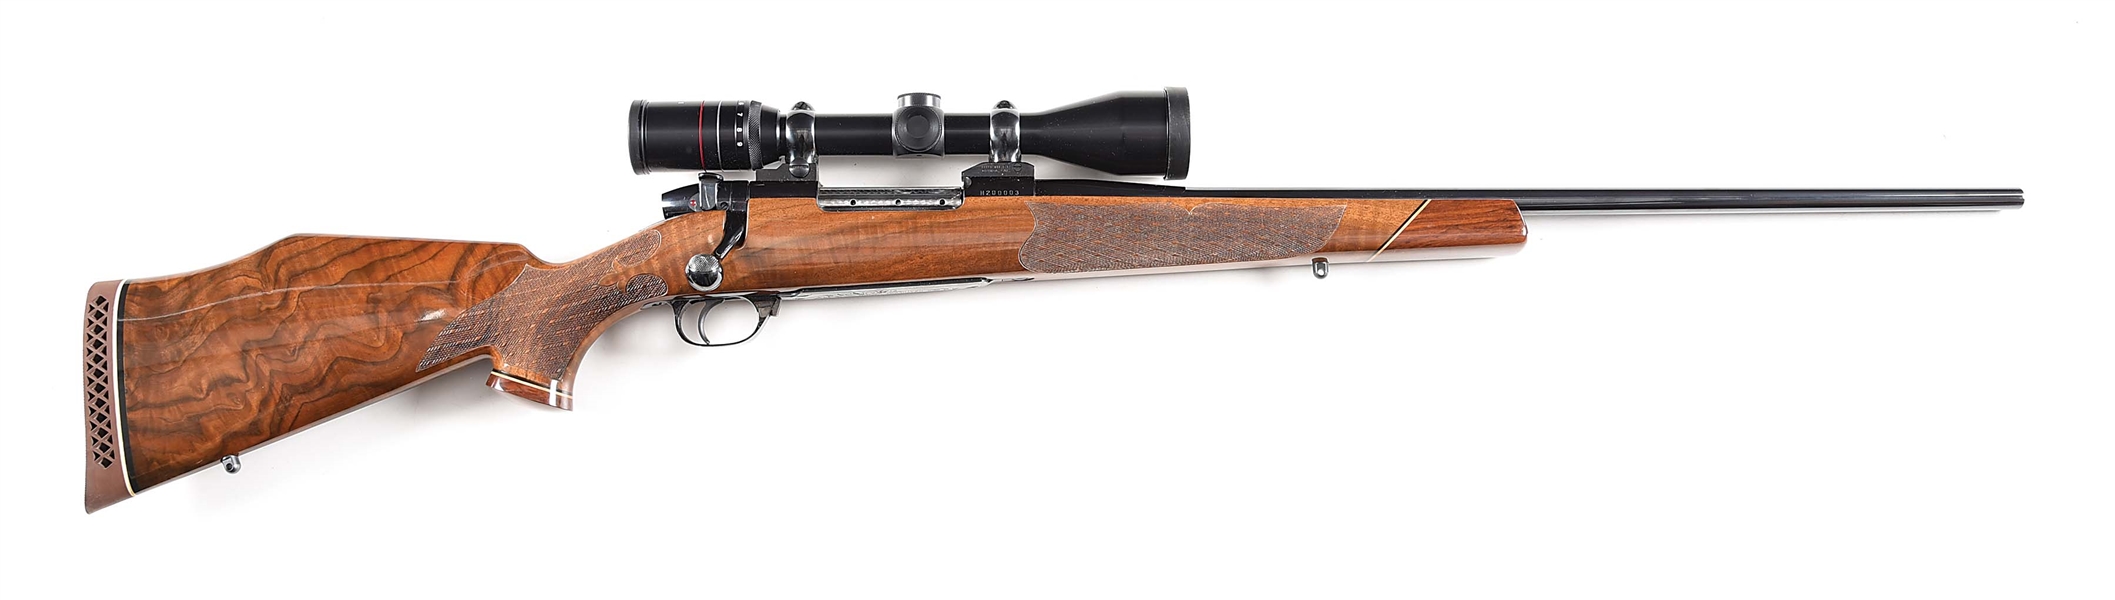 (M) WEATHERBY MARK V BOLT ACTION RIFLE IN .270 WEATHERBY MAGNUM.